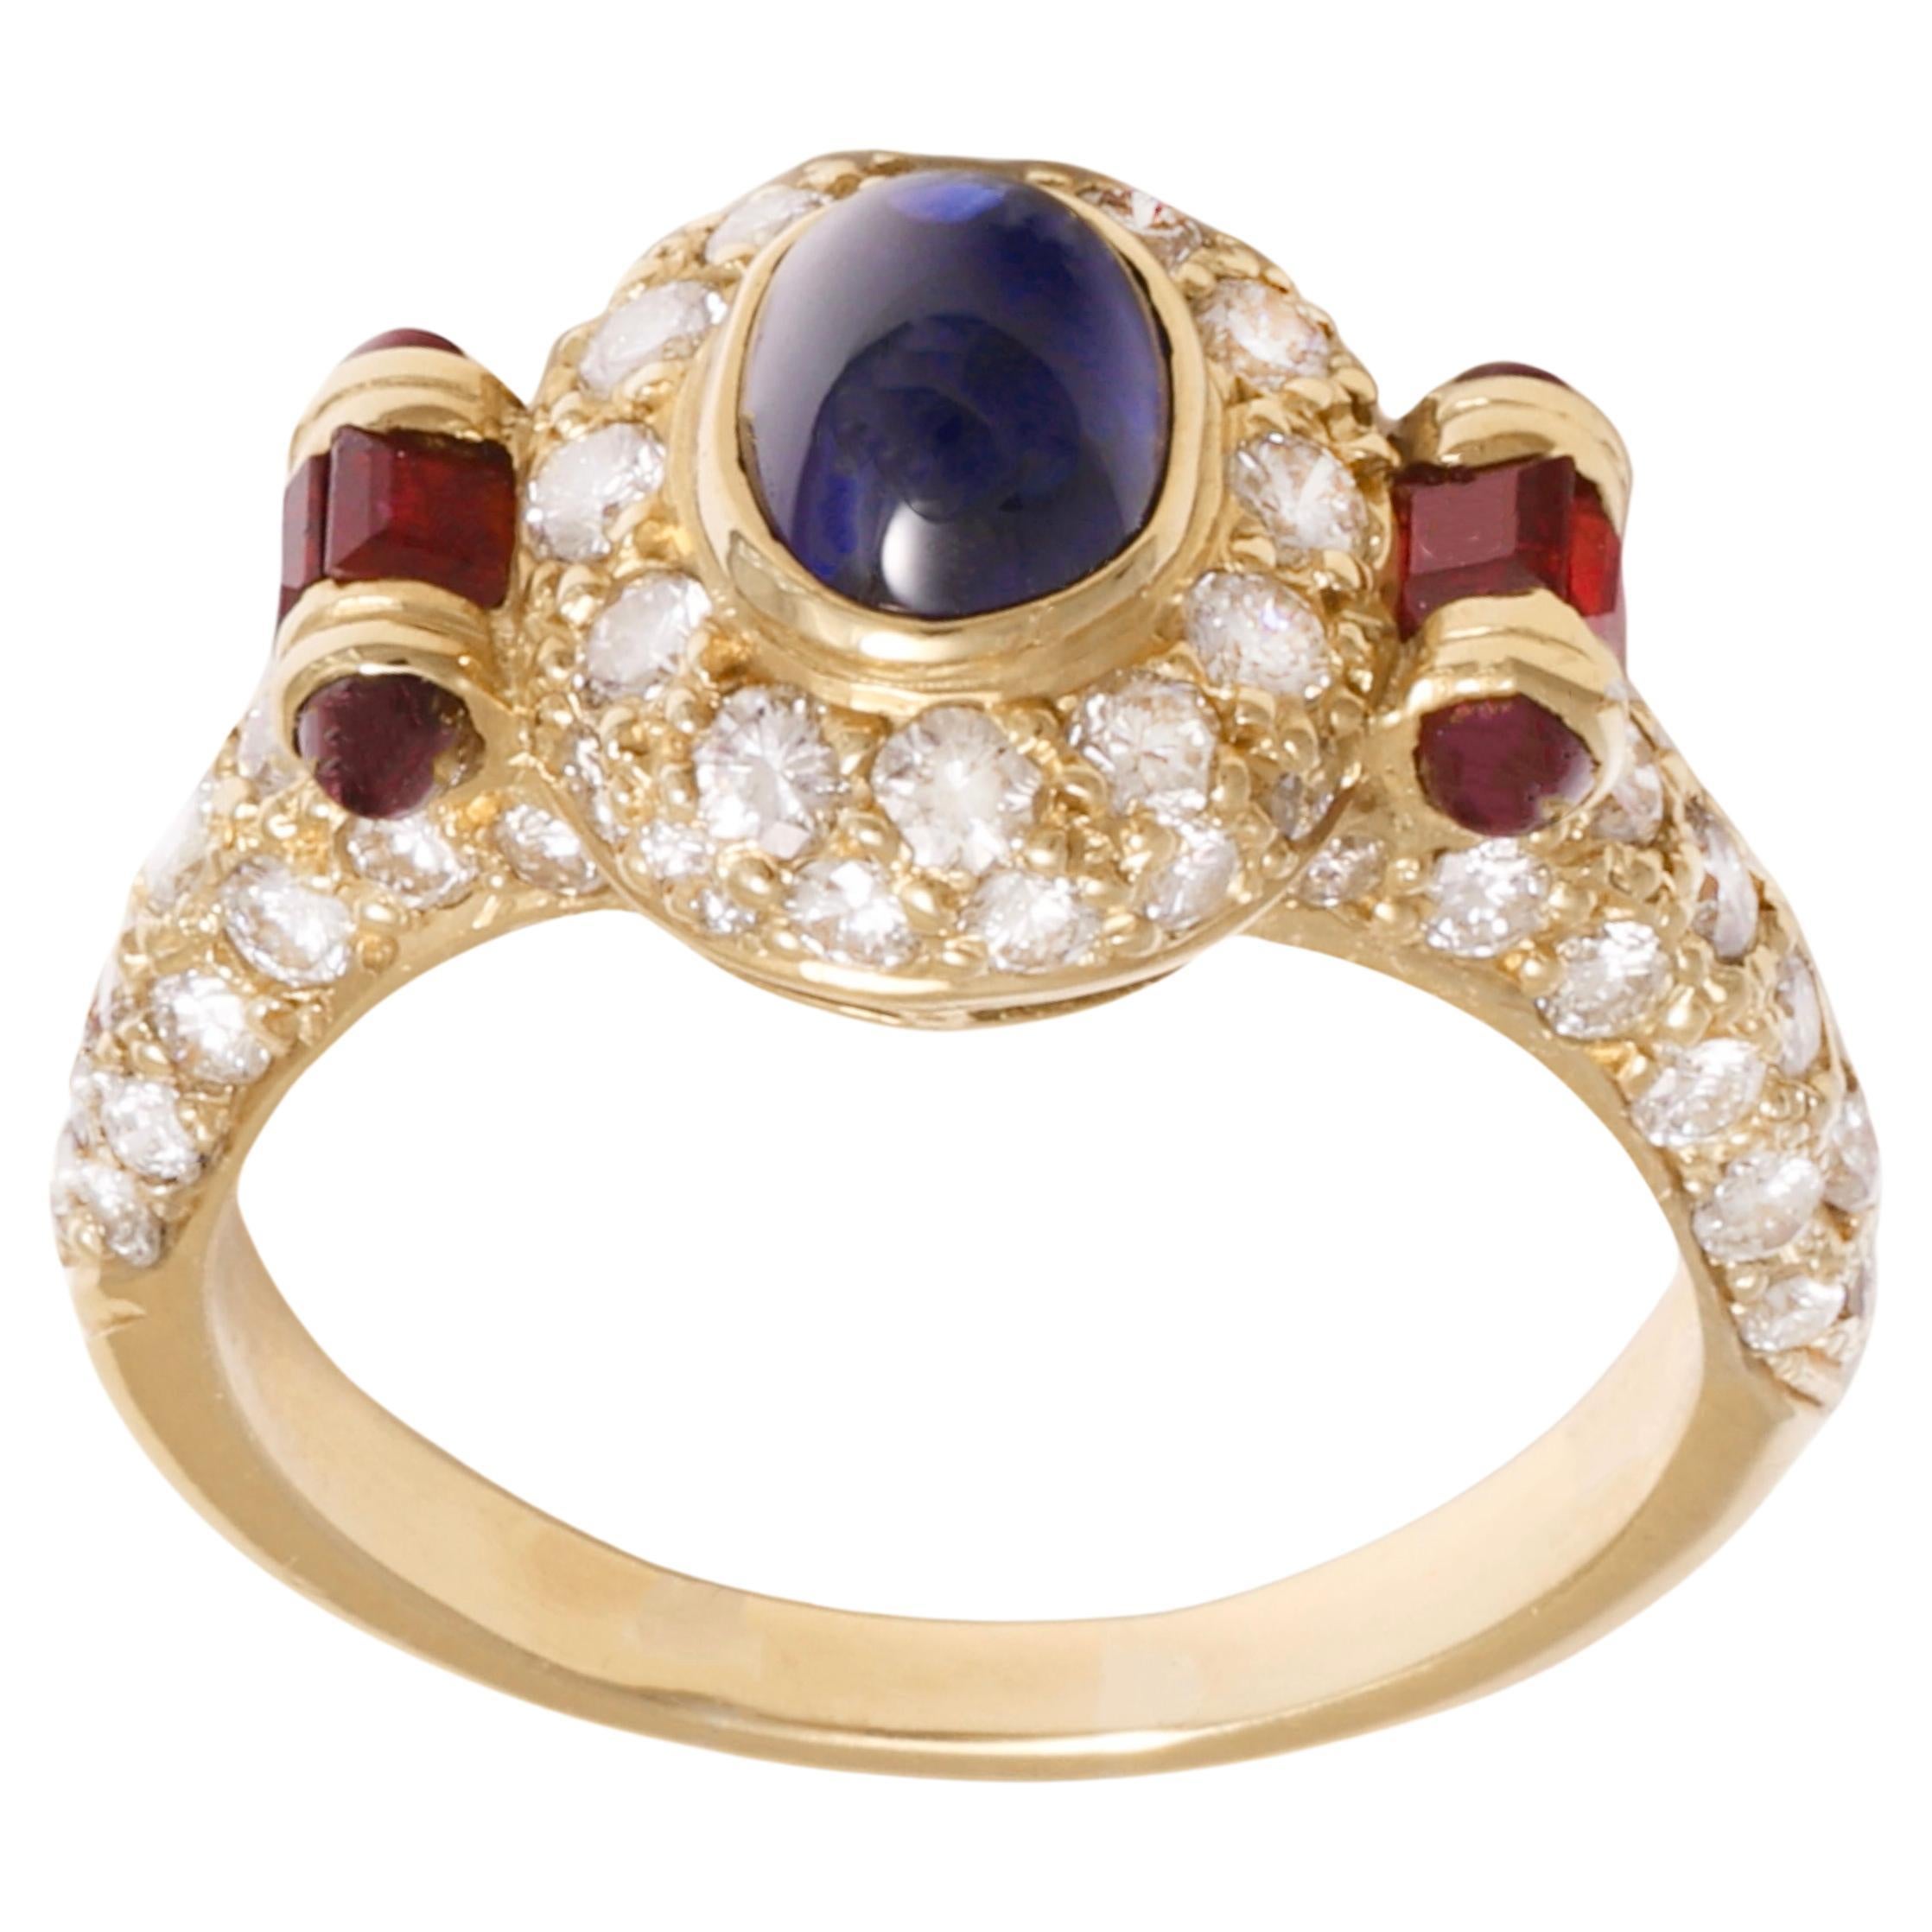  18 kt. Gold Ring With 1.20 ct. Cabochon Sapphire & Ruby & Diamond For Sale